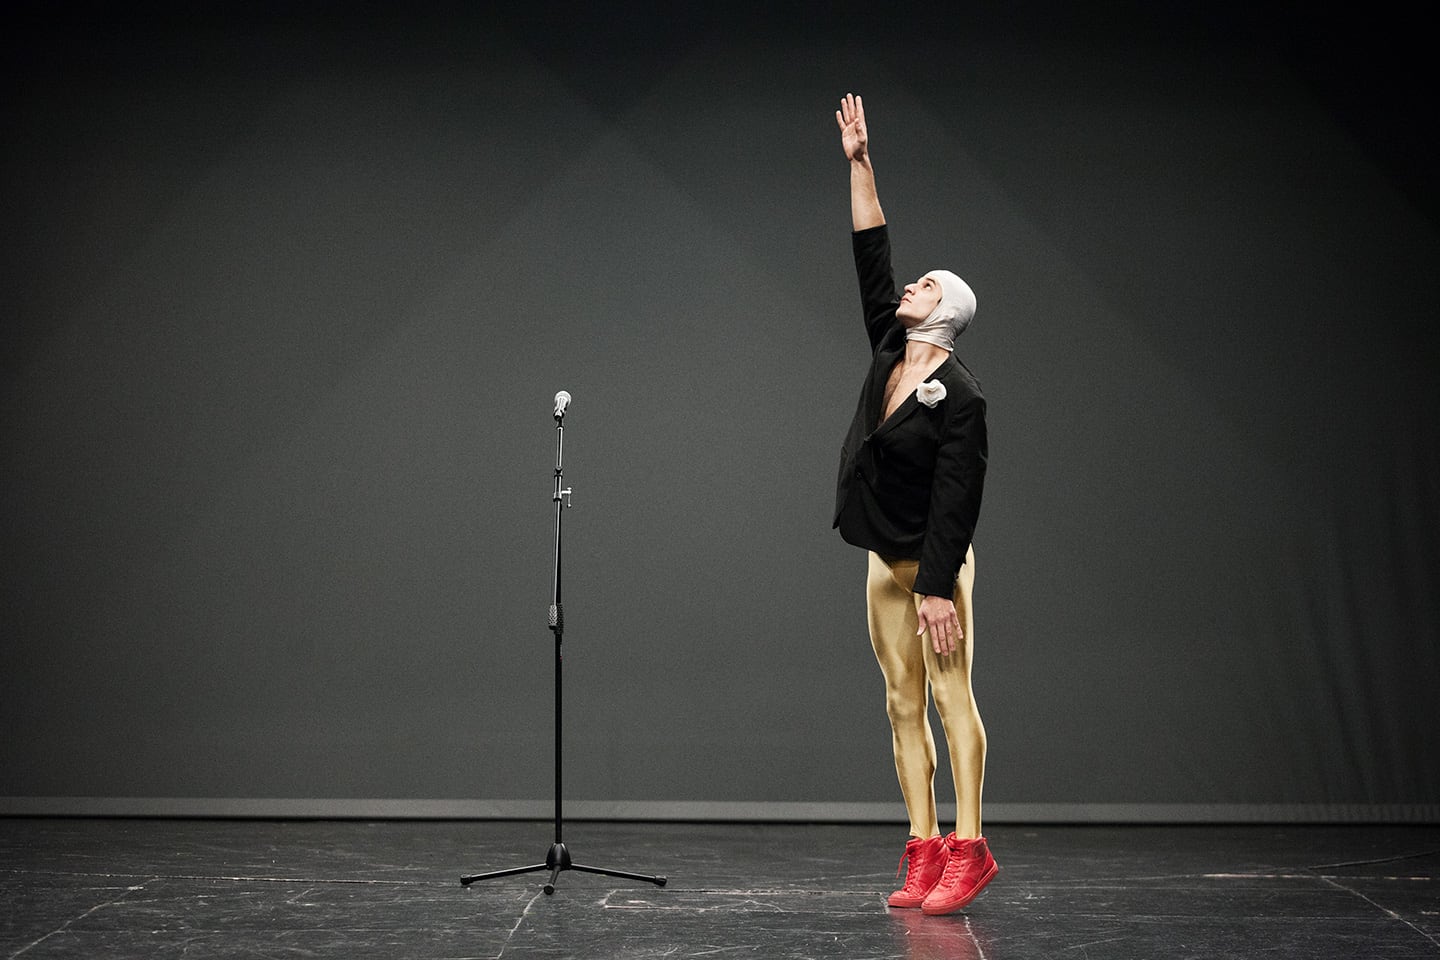 Man in silver balaclava, black jacket, gold tights and red boots, reaches upwards on tiptoe. Next to him is a microphone stand